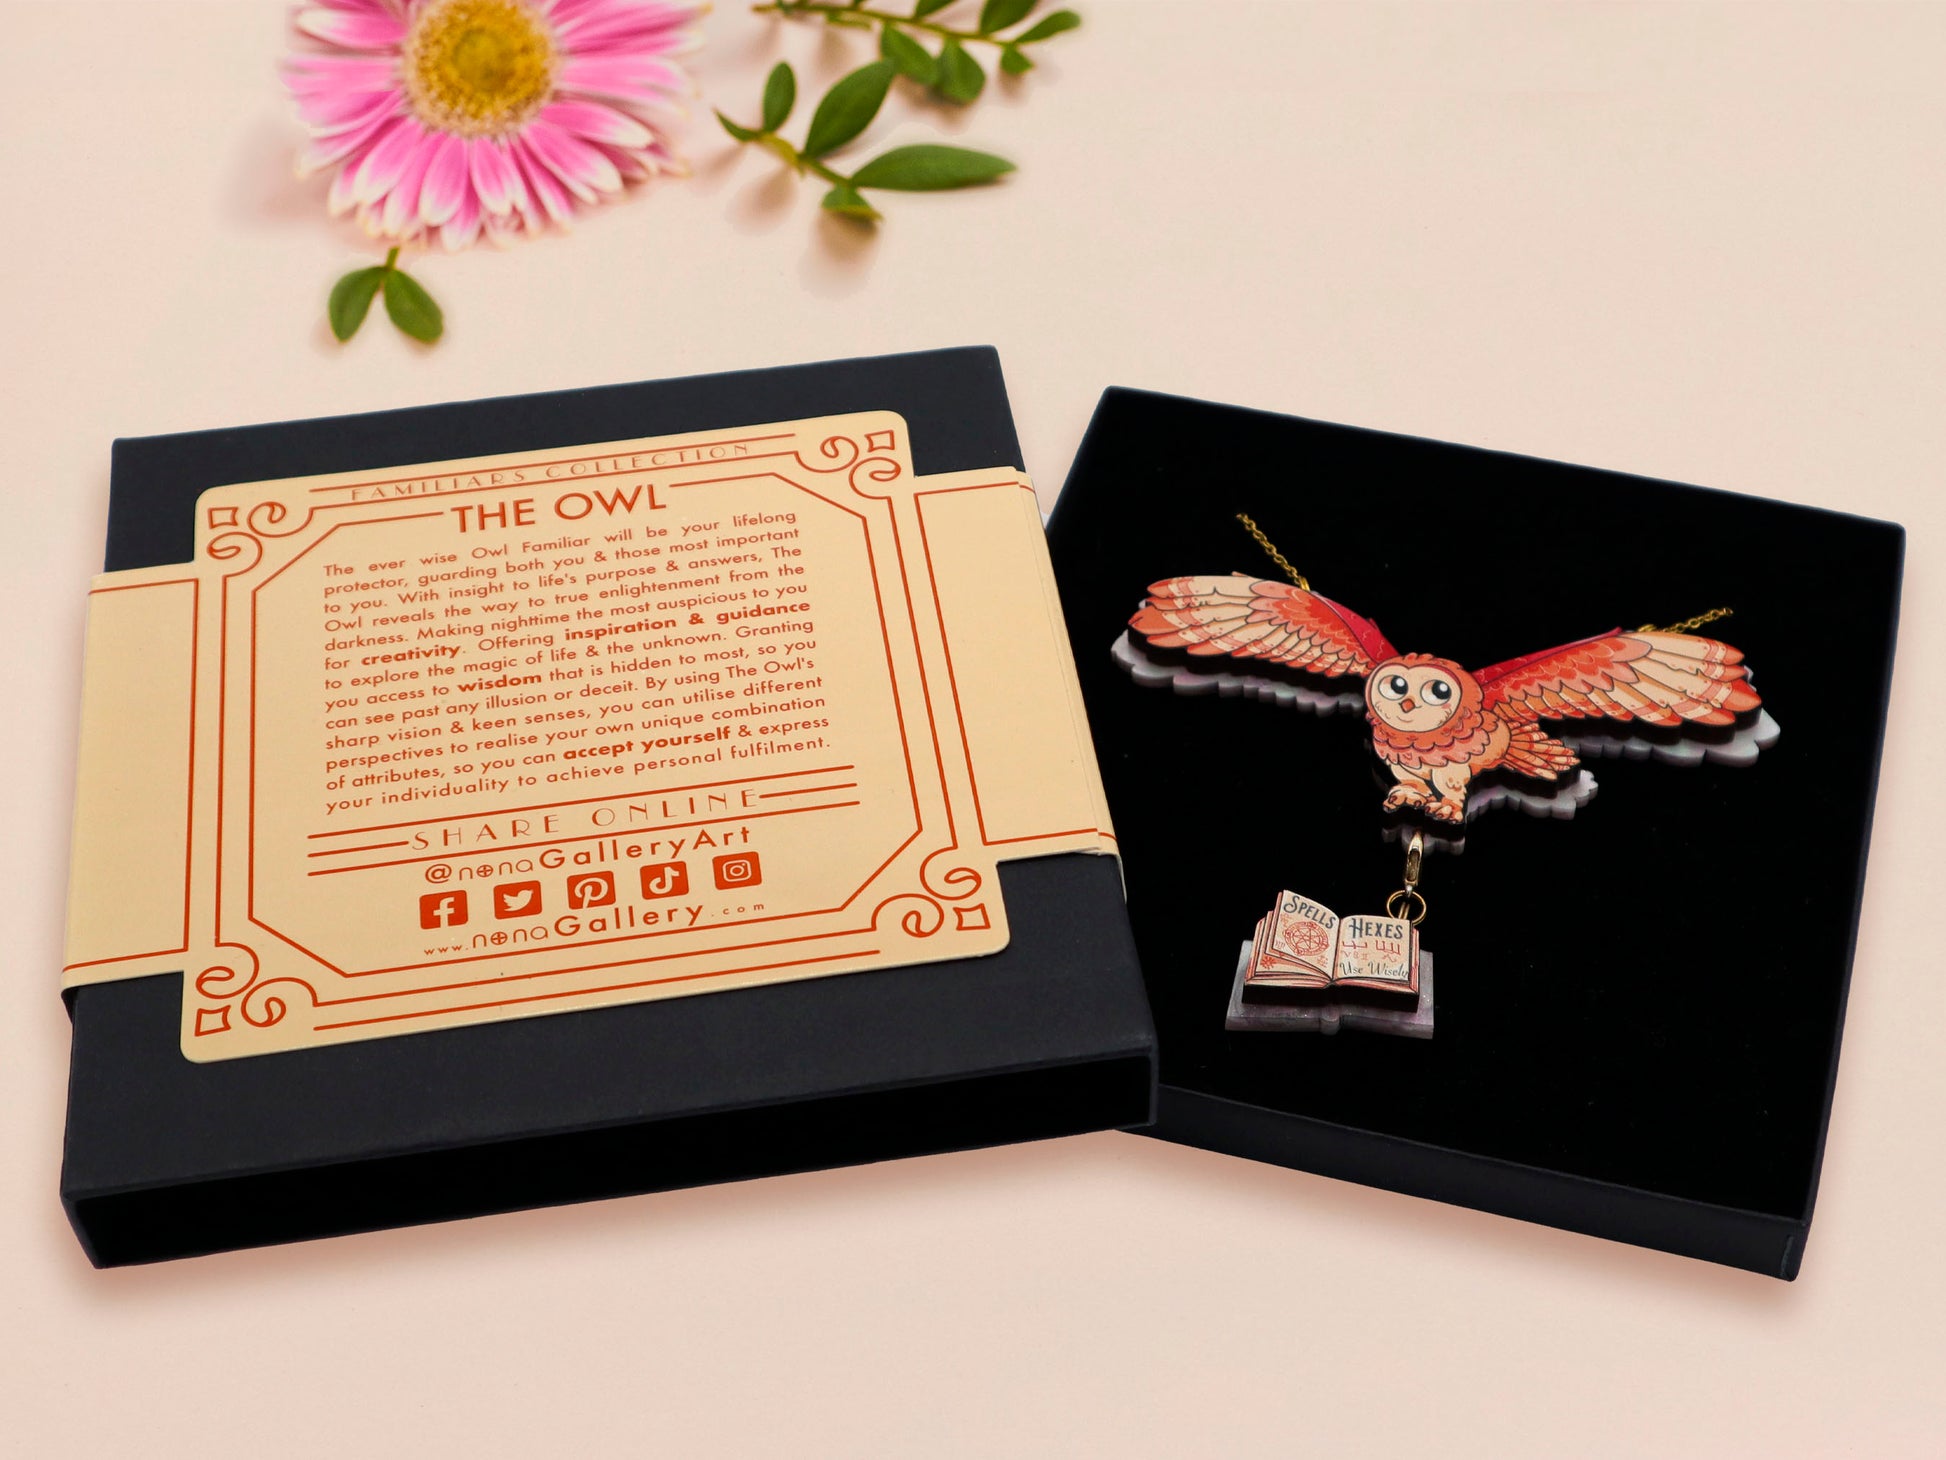 Mixed material handmade necklace of chibi cartoon flying barn owl with pearlescent wings carrying a removeable spell book charm, with a gold chain and black gift box with a yellow familiars collection gift sleeve.